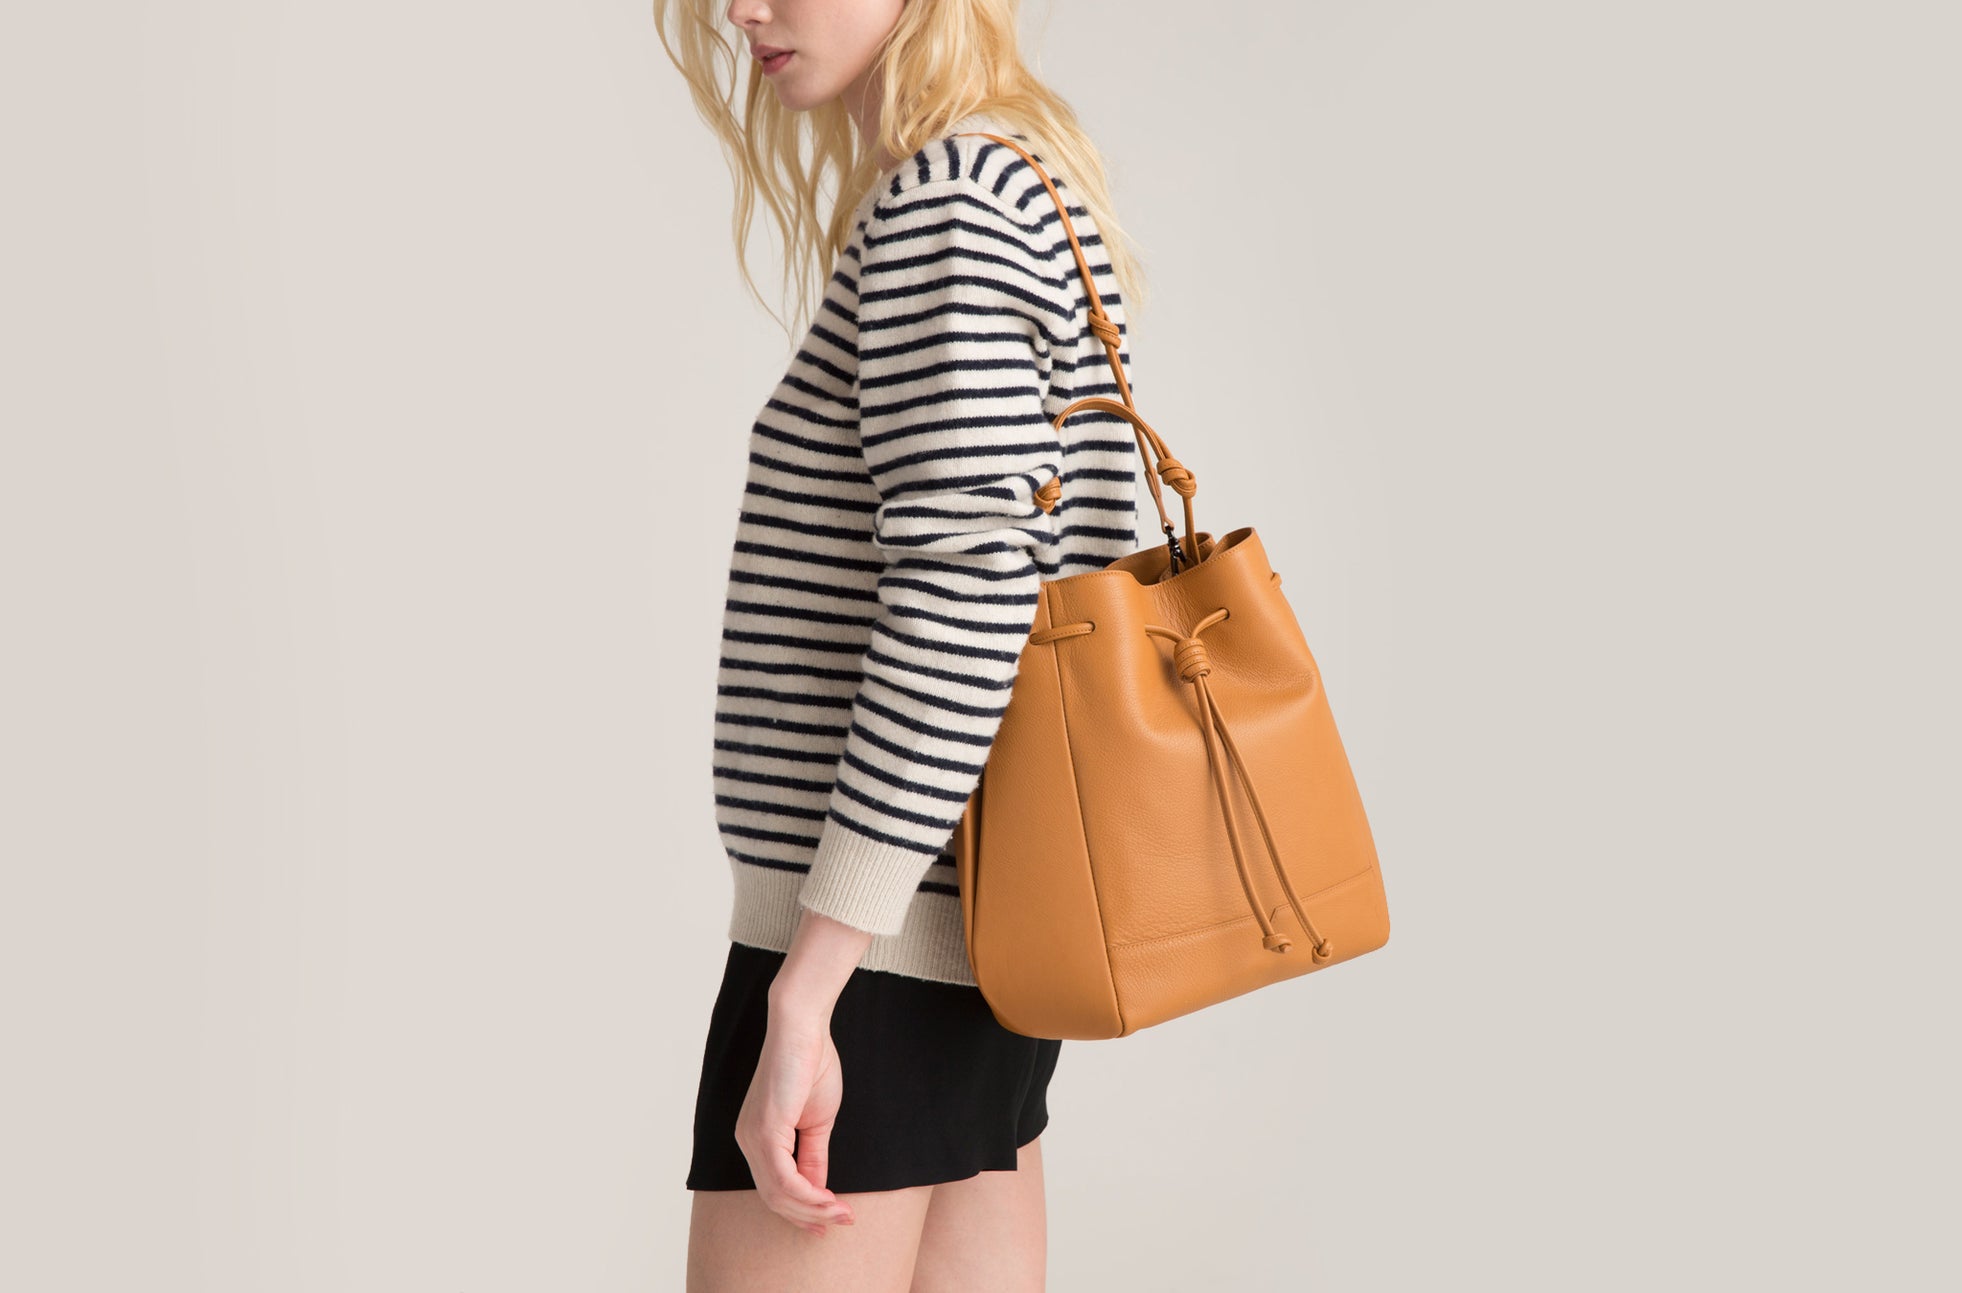 The Large Bucket Backpack in Technik-Leather in Caramel image 2